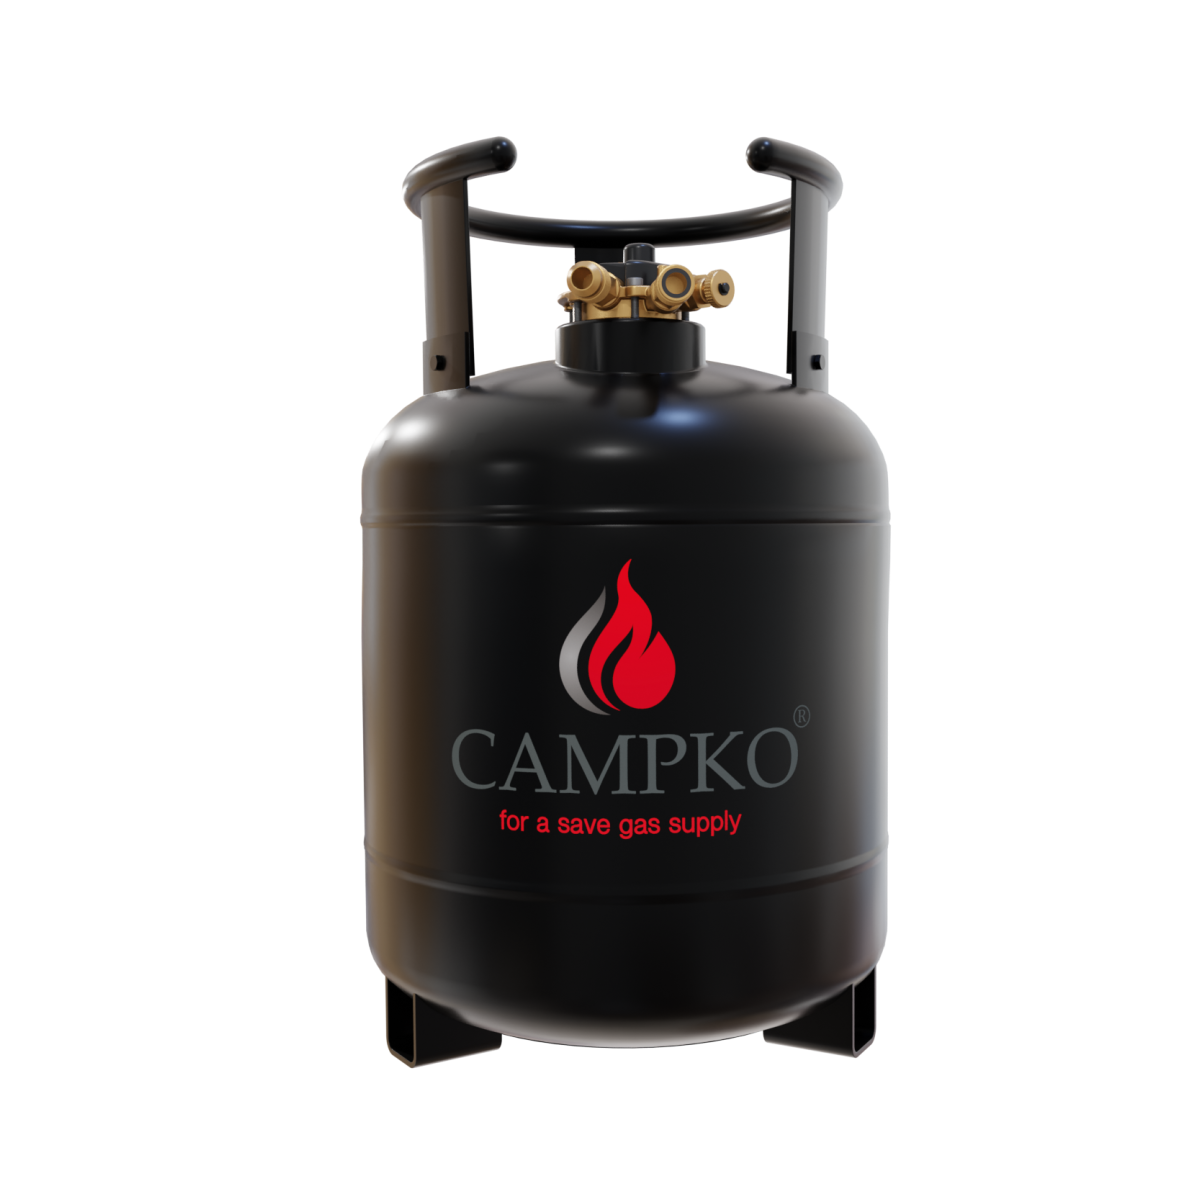 CAMPCO REFILLABLE GAS LPG BOTTLE 22 LTR (14KG) integrated multivalve with automatic 80% filling stop